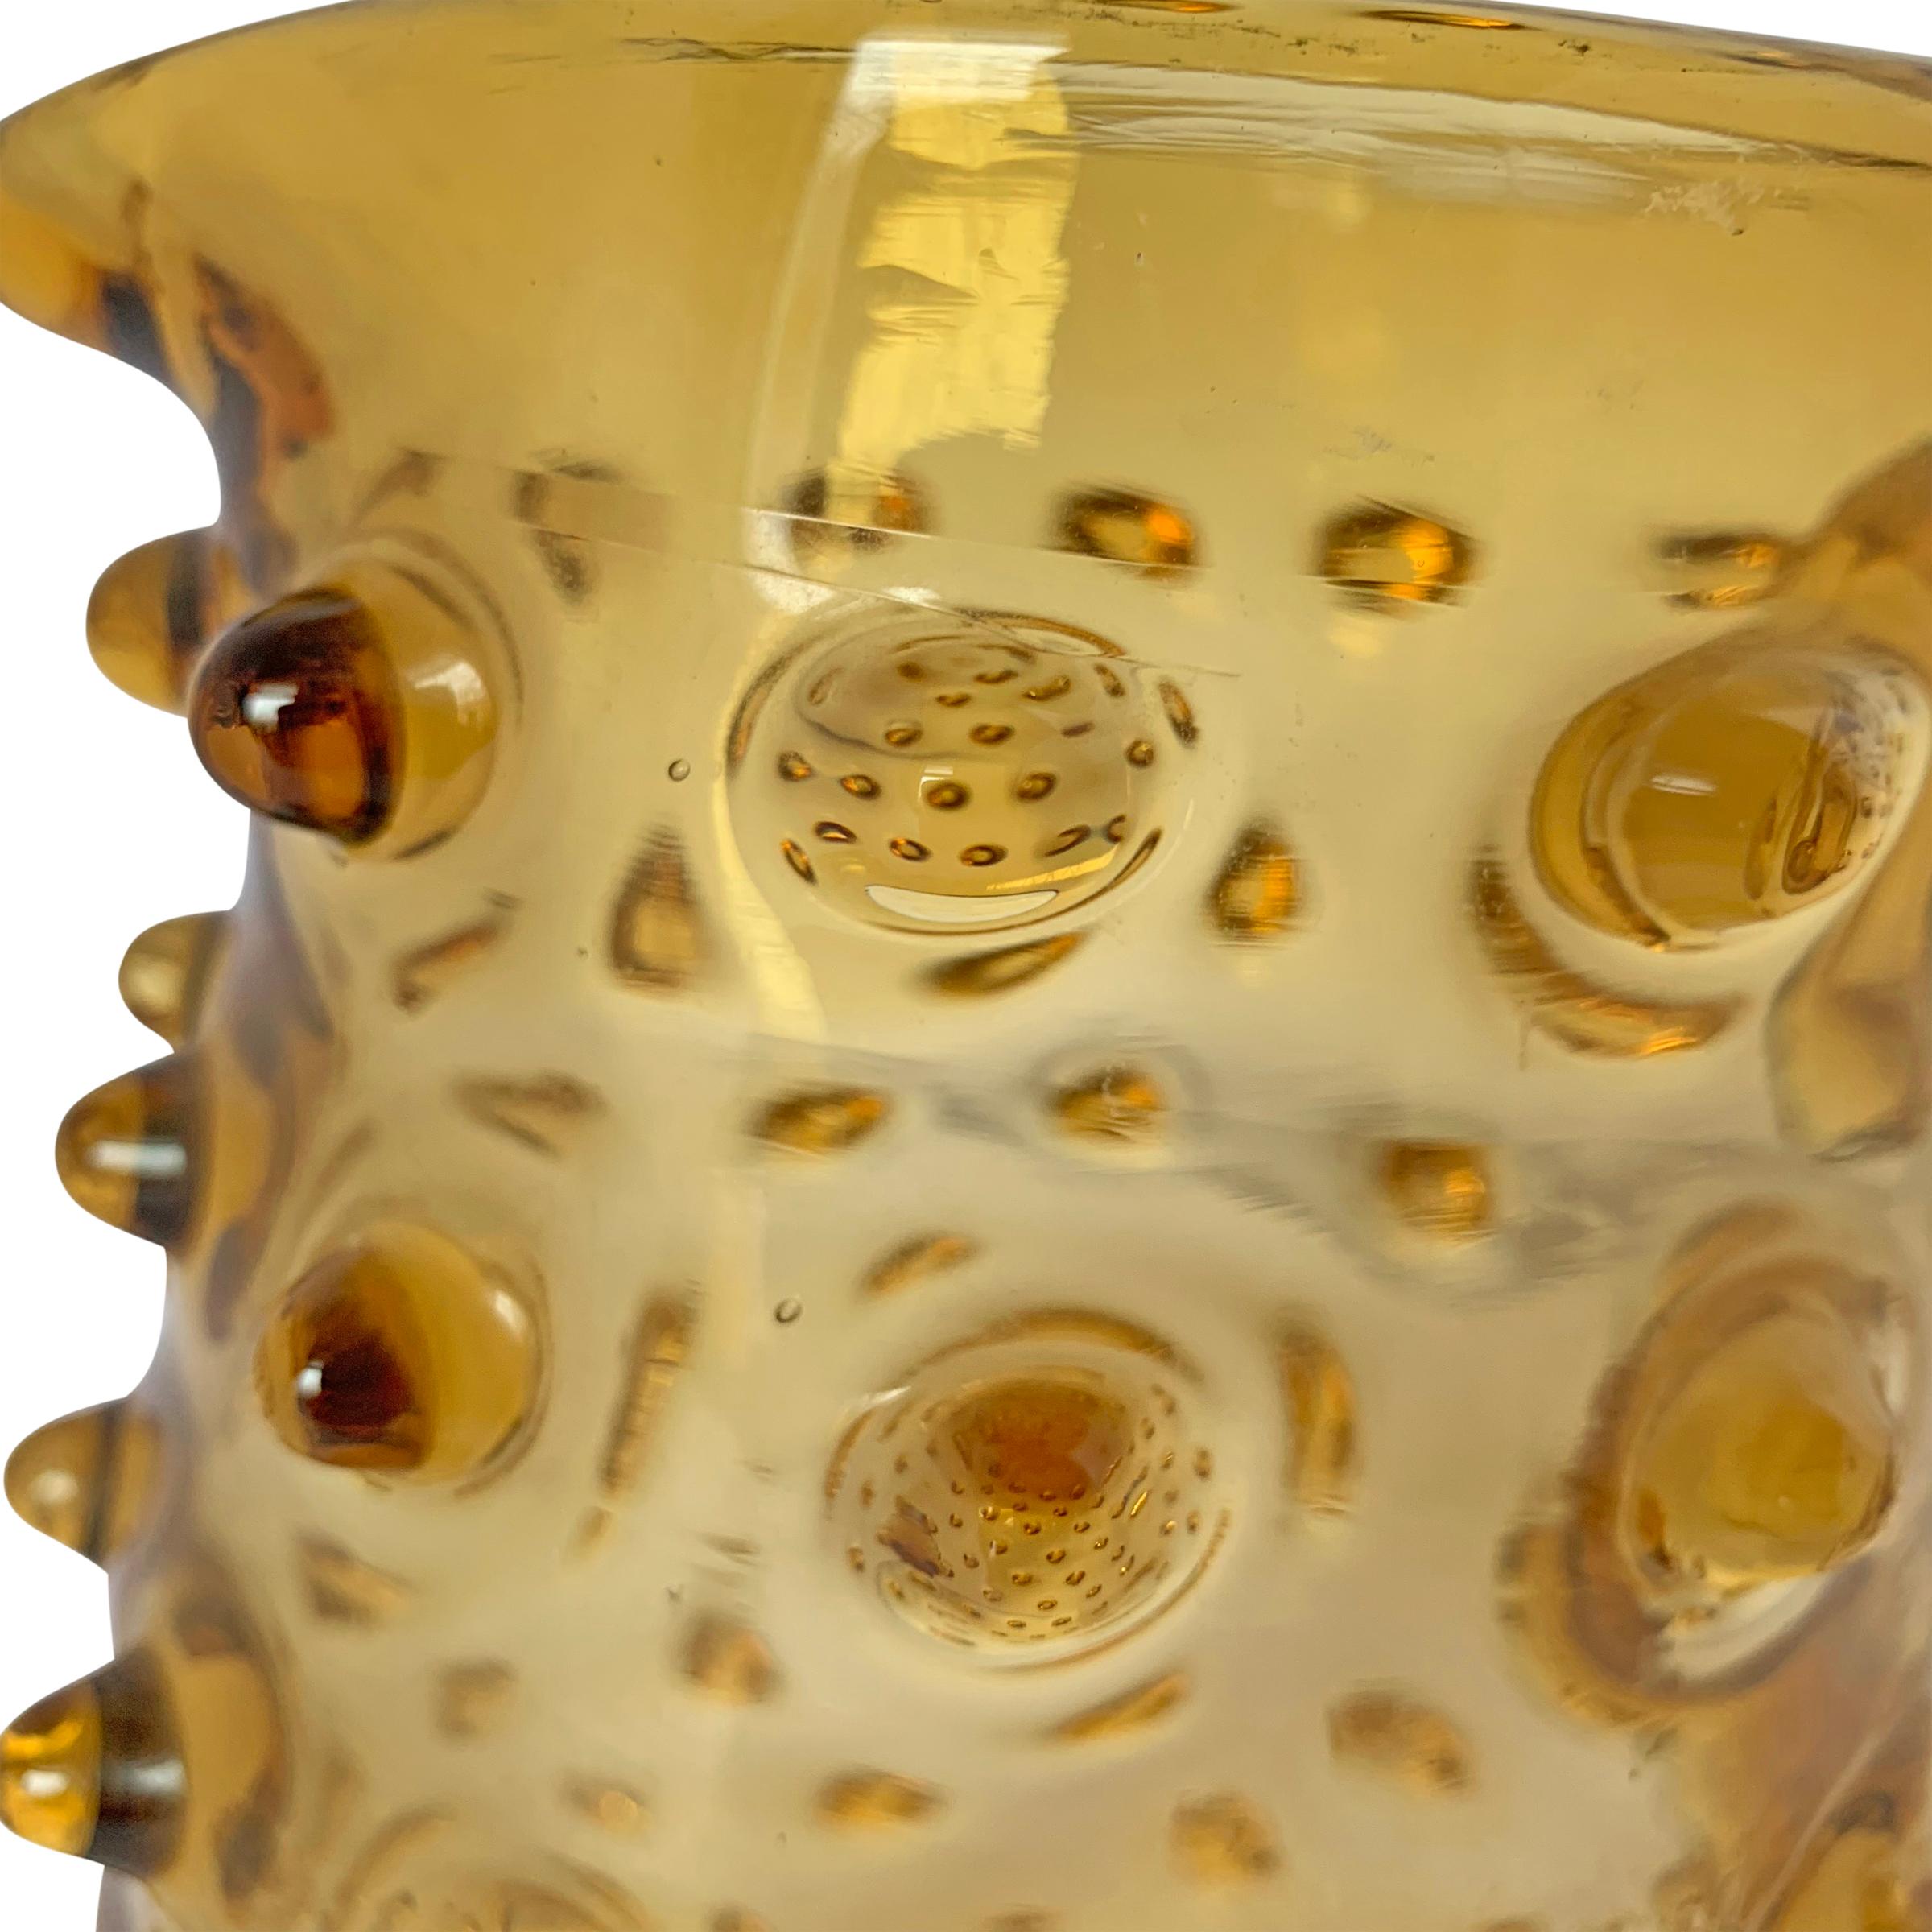 Mid-Century Modern Mid-20th Century American Amber Glass Hobnail Pitcher